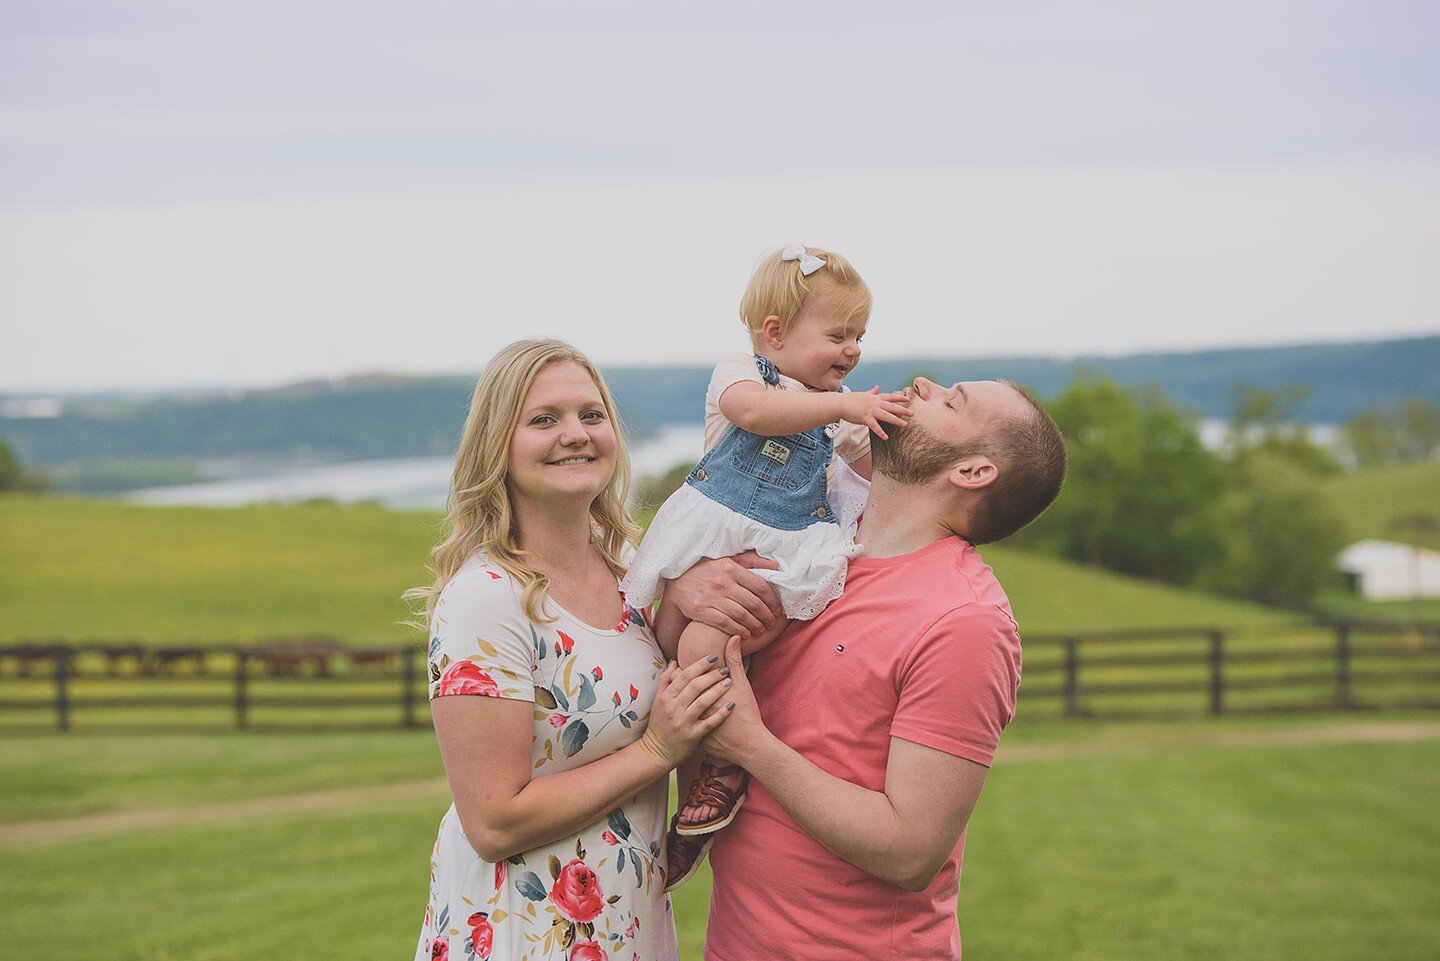 The best family photos just happen
.
.
.
.
.
#lancasterpaphotographer #lancasterpaphotography #lititzpaphotographer #realphotos #toddlerphotos #toddlerphotosession #familyportraiture #sunsetportraits #fampic #timelessphotography #nikoncameras